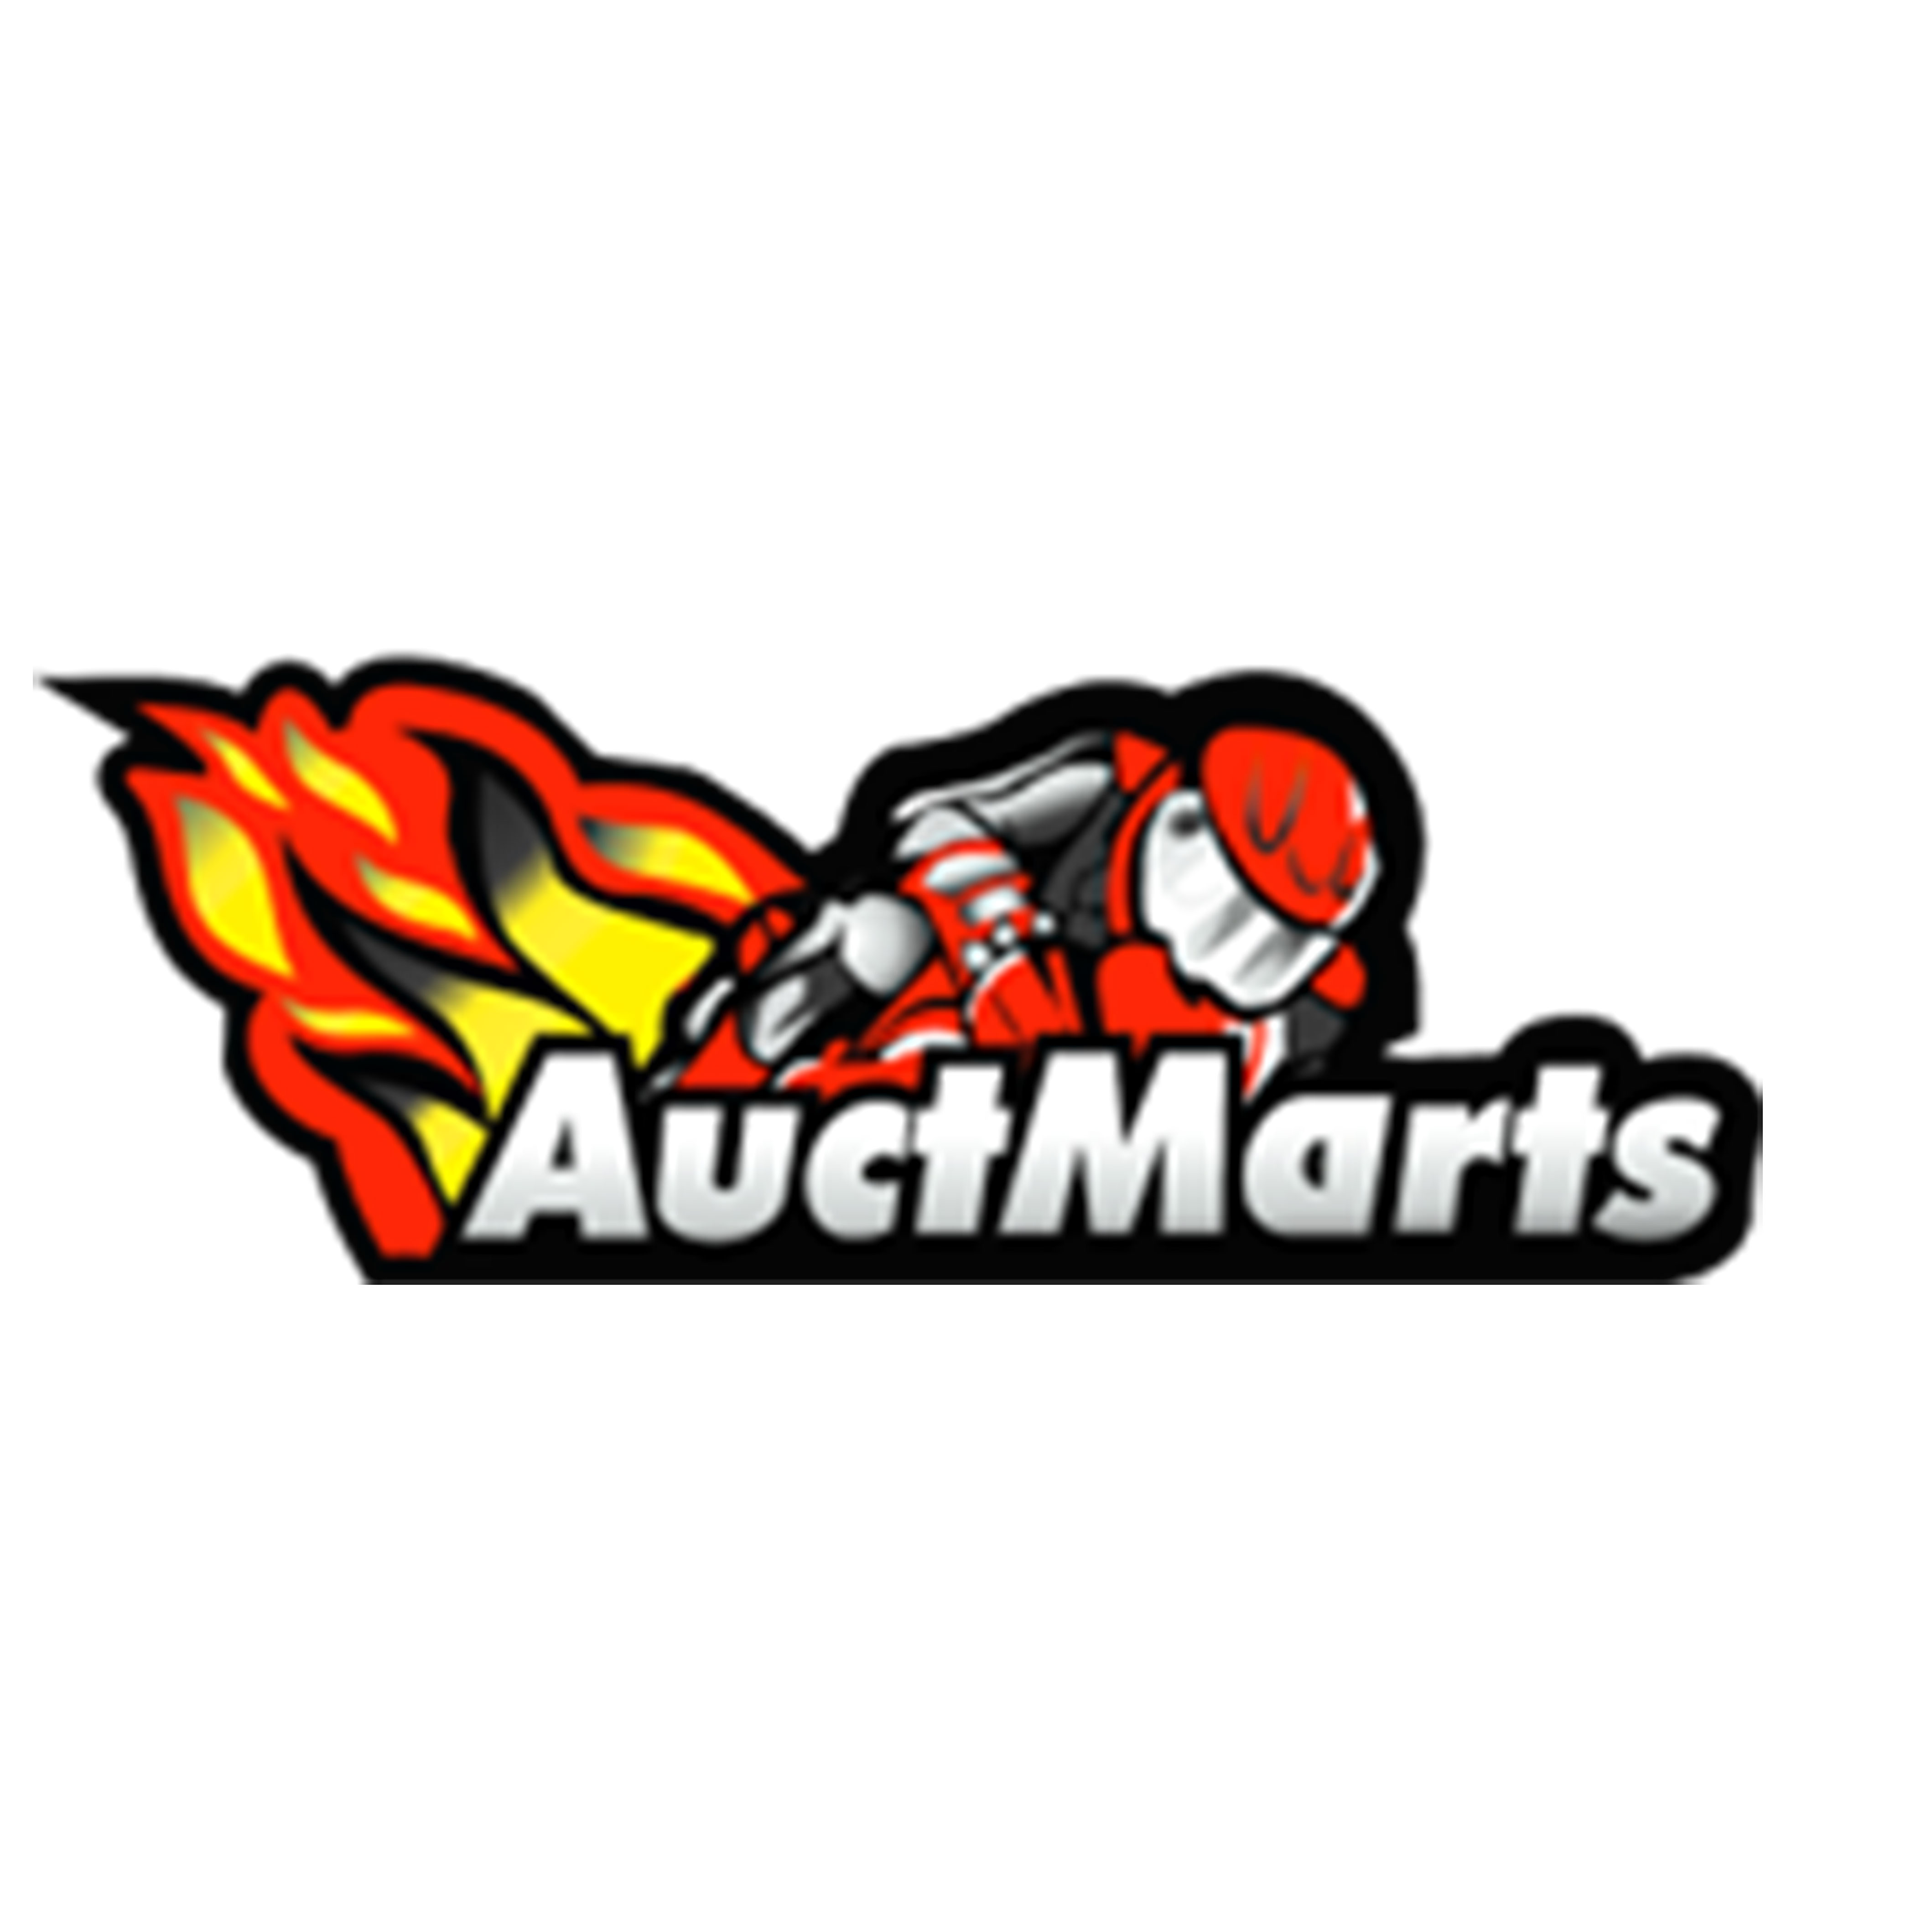 Auctmarts Trading discount codes